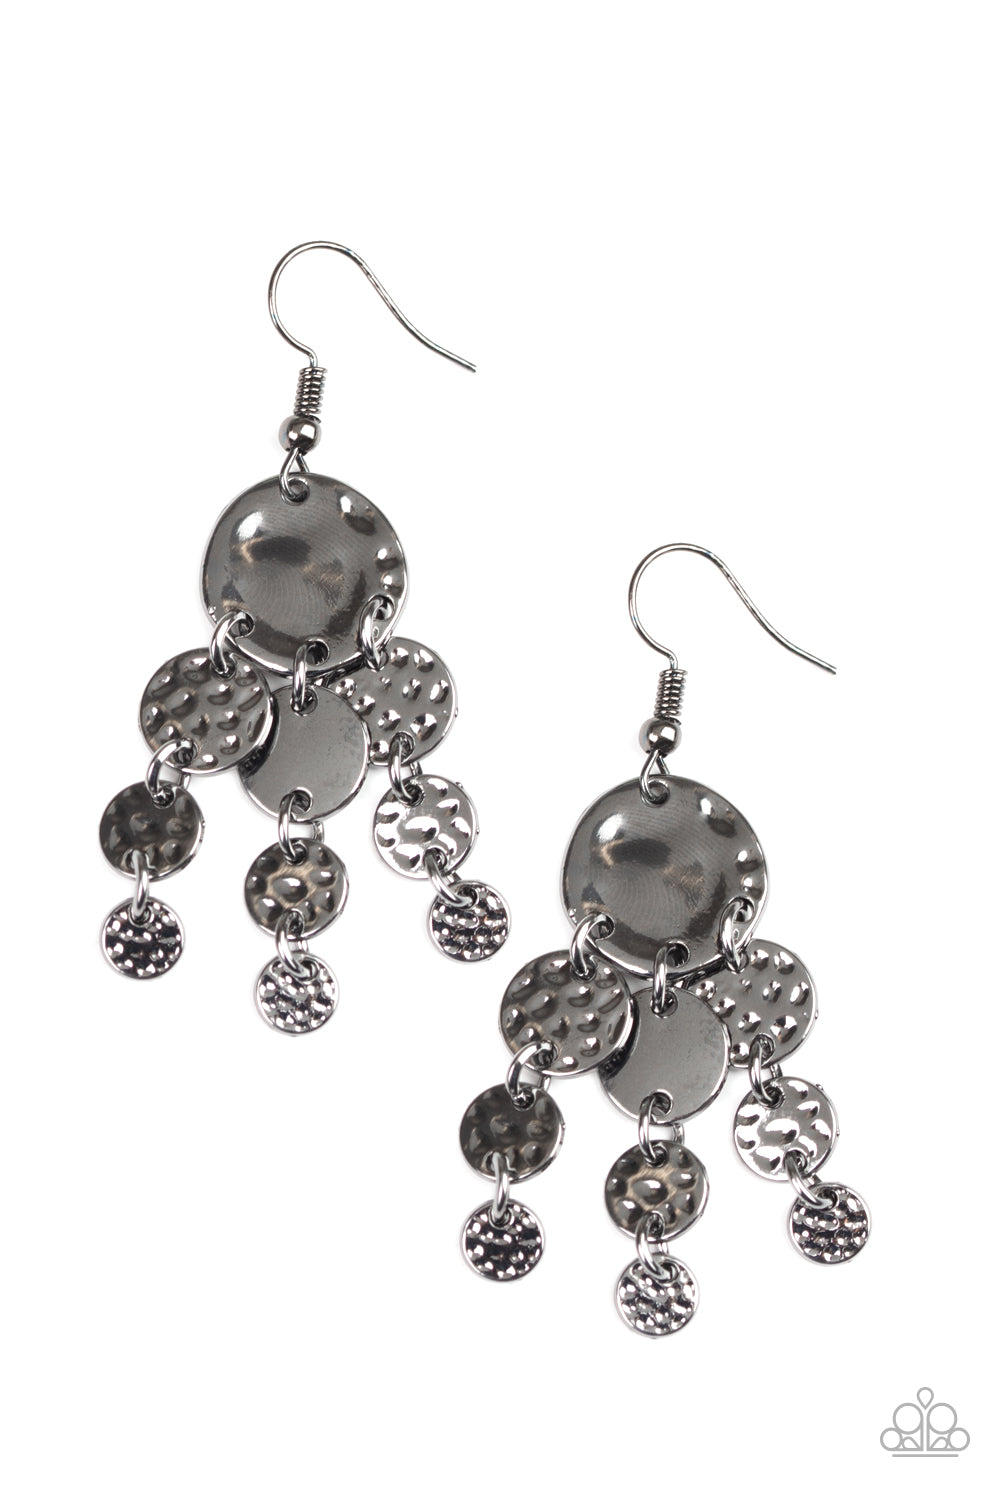 Featuring smooth and hammered finishes, a dainty collection of gunmetal discs dangle from the bottom of a round gunmetal fitting, creating a chime-like fringe. Earring attaches to a standard fishhook fitting.